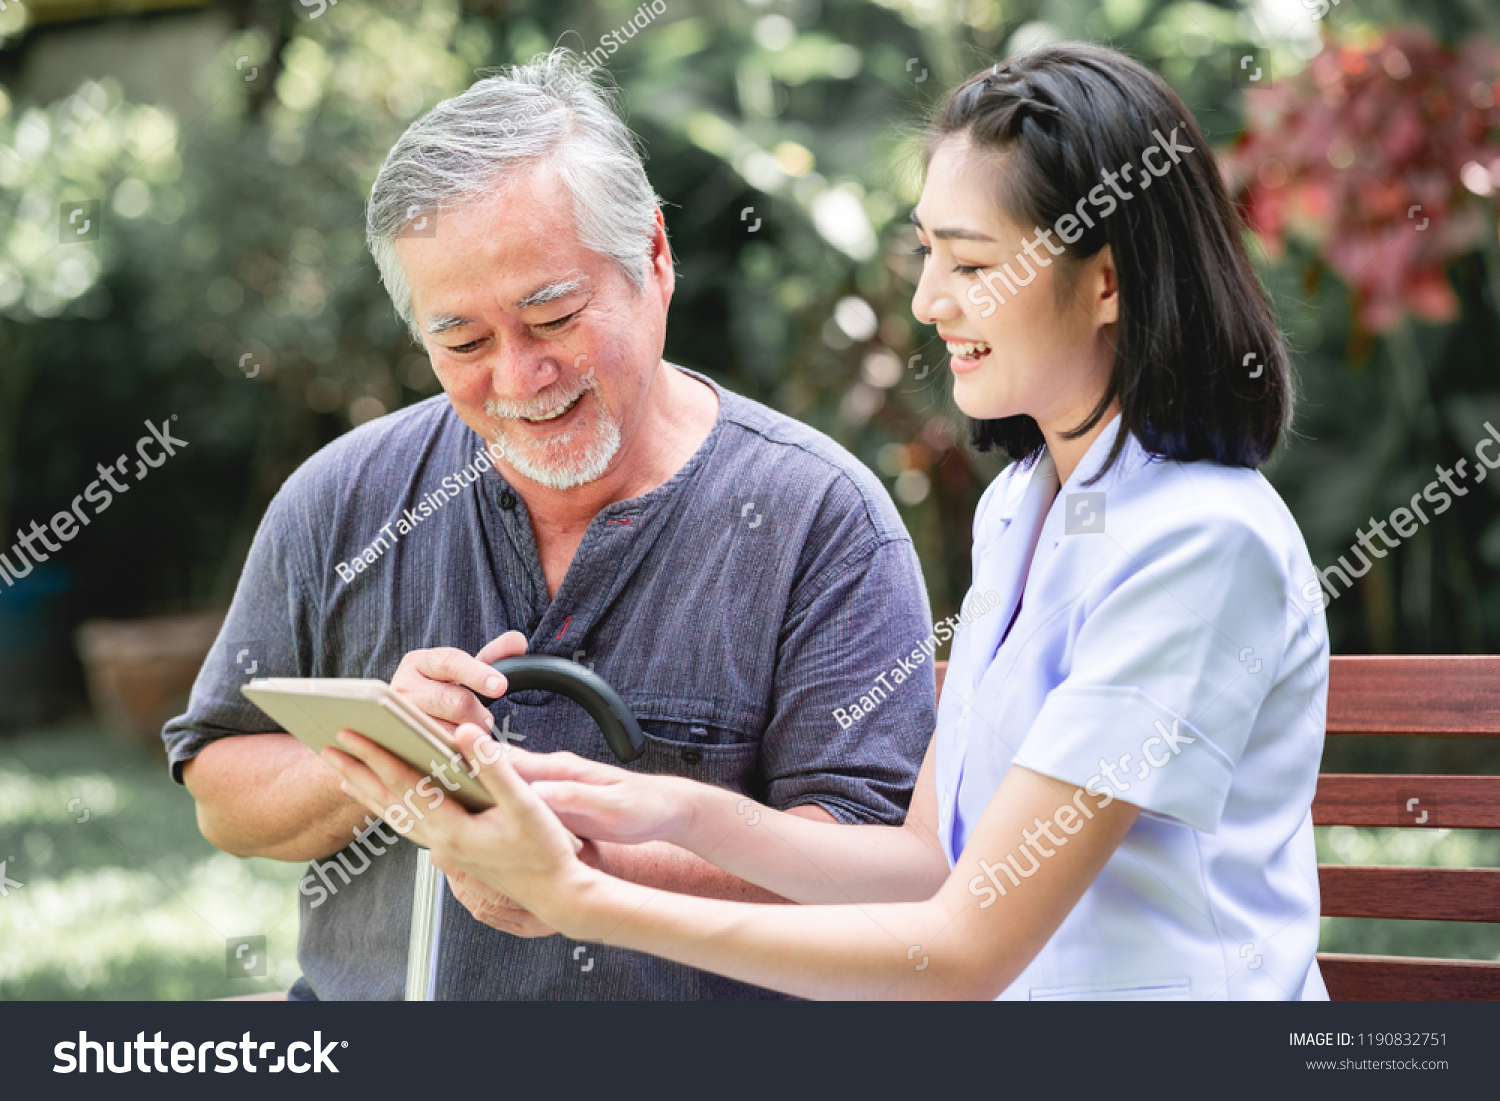 Nurse with patient sitting on bench together looking at tablet. Asian old man and young woman sitting together talking. Relax mood. #1190832751